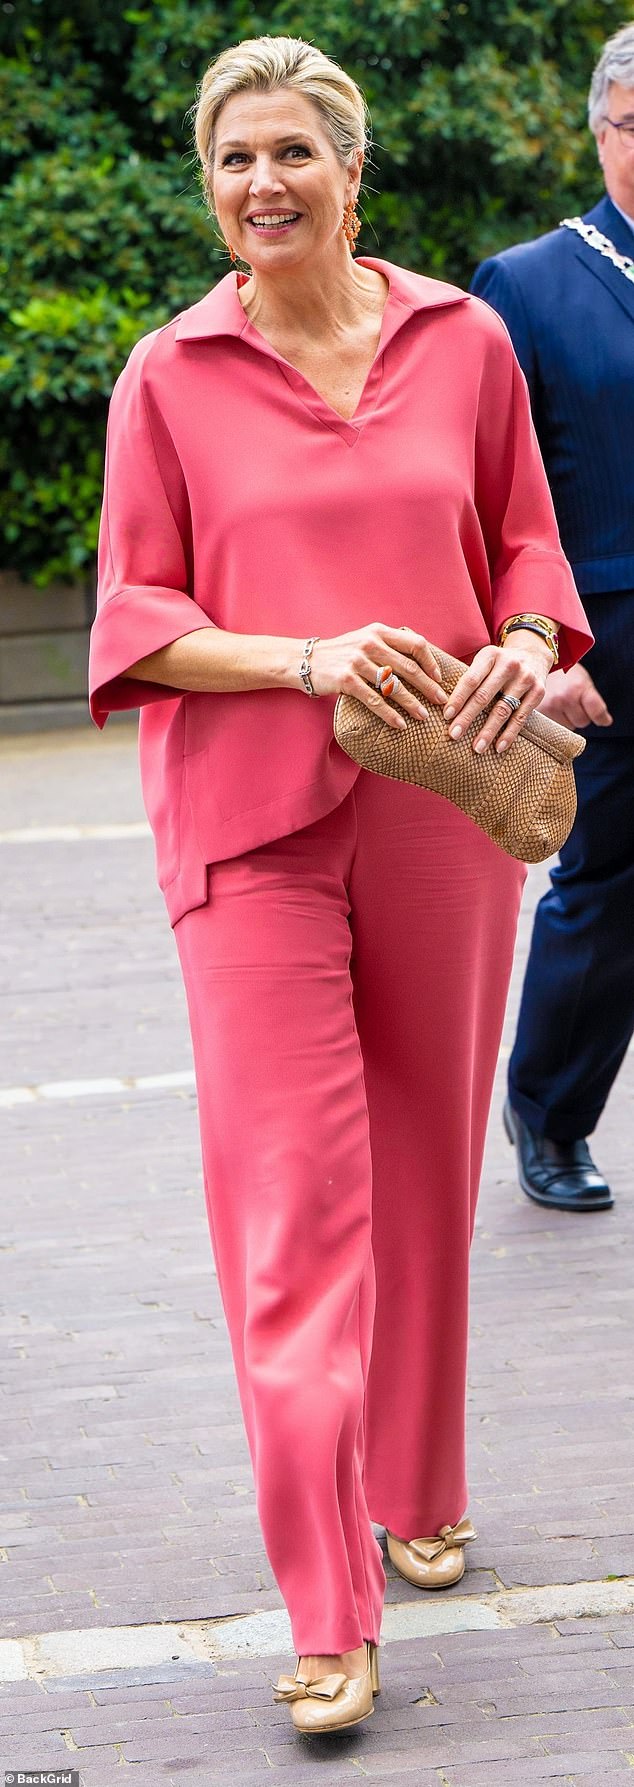 Queen Maxima of the Netherlands (pictured) is known for her coordinating outfits and accessories, but Miranda warned against being 'too matchy matchy'